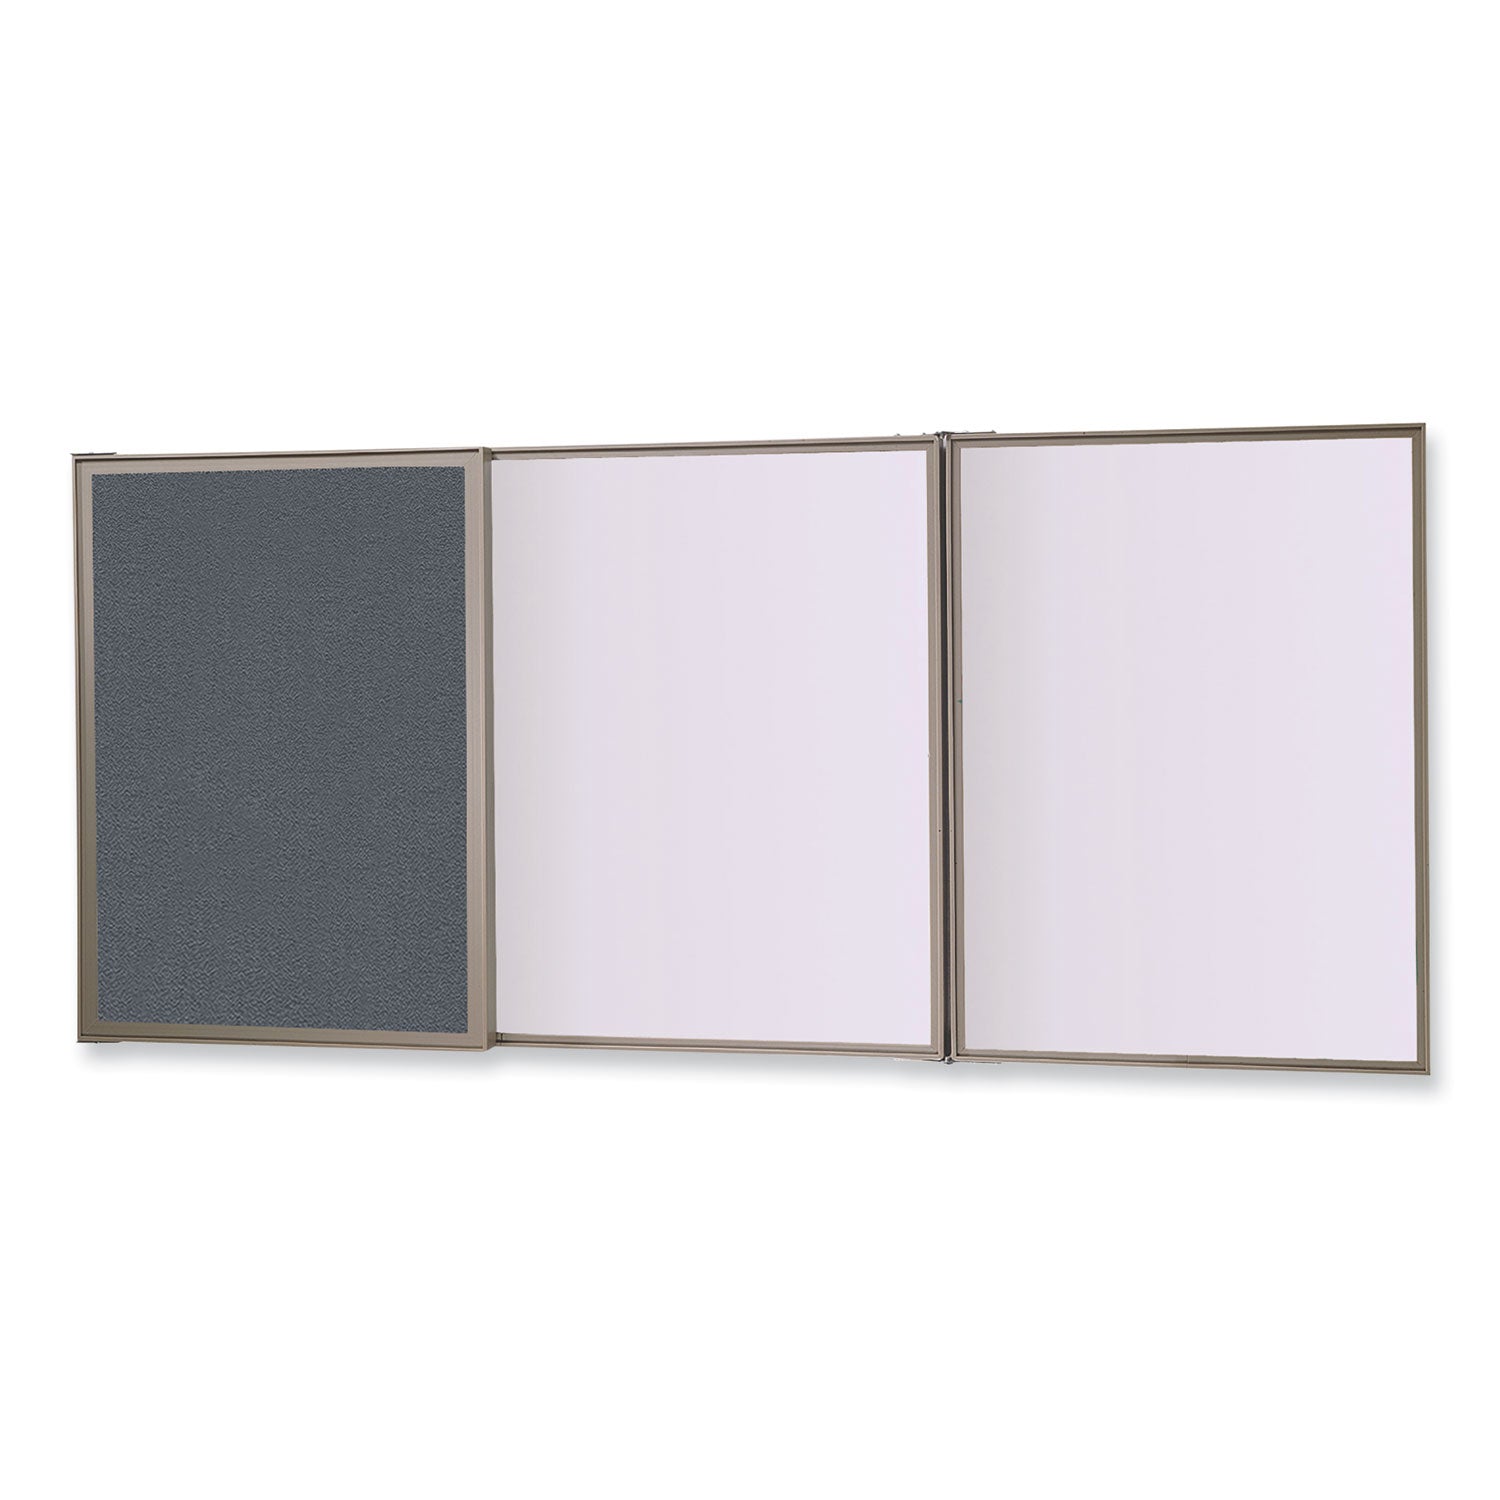 visuall-pc-whiteboard-cabinet-gray-fabric-bulletin-board-exterior-doors-36x24-aluminum-frame-ships-in-7-10-business-days_ghe41302 - 2